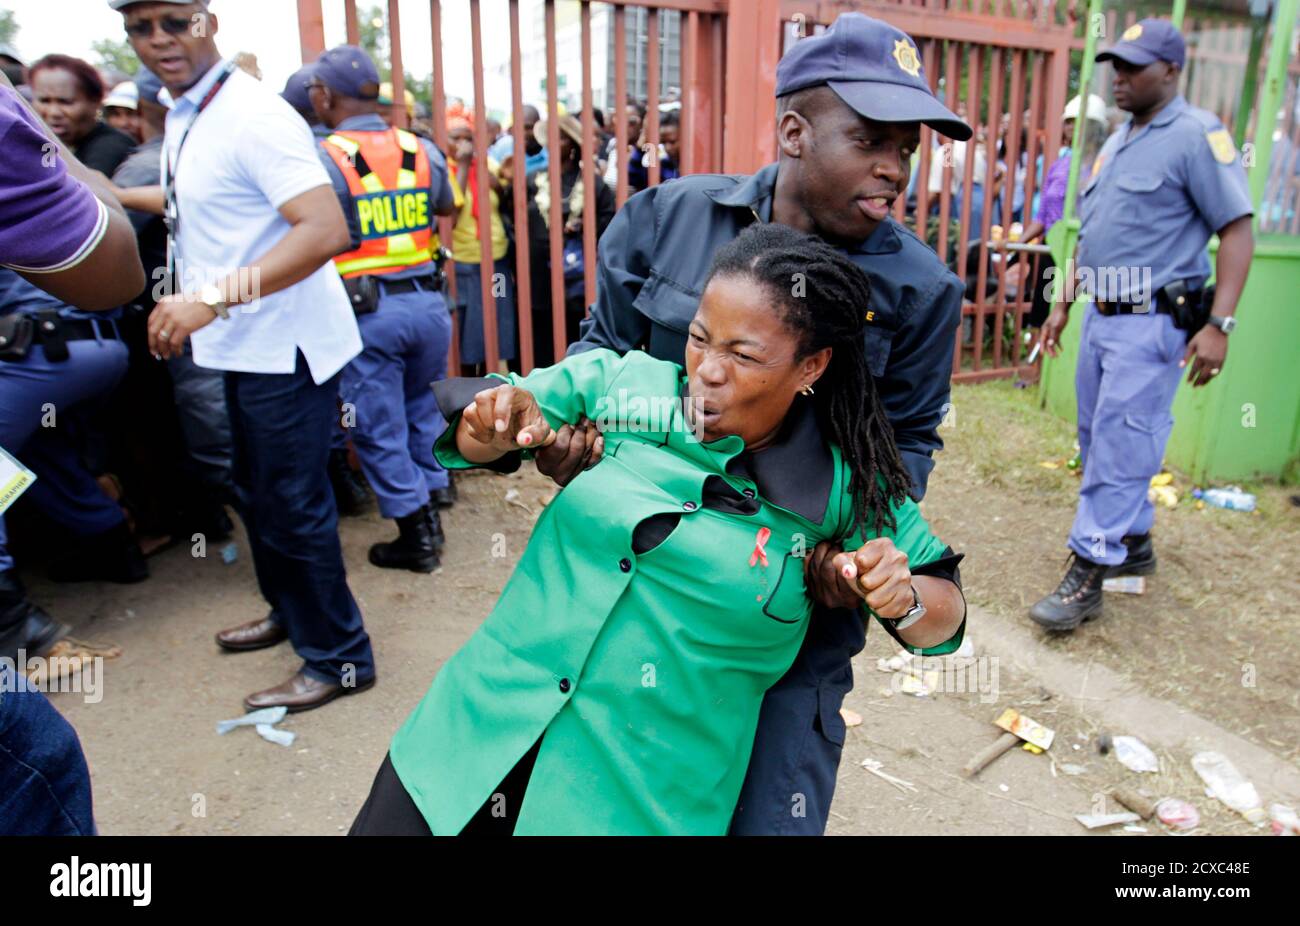 A policeman assists a mourner who fell during a stampede while running to queue before boarding a bus to take her to the Union Buildings, where former South African President Nelson Mandela is lying in state, in Pretoria December 13, 2013. REUTERS/Thomas Mukoya (SOUTH AFRICA - Tags: OBITUARY POLITICS TPX IMAGES OF THE DAY) Stock Photo